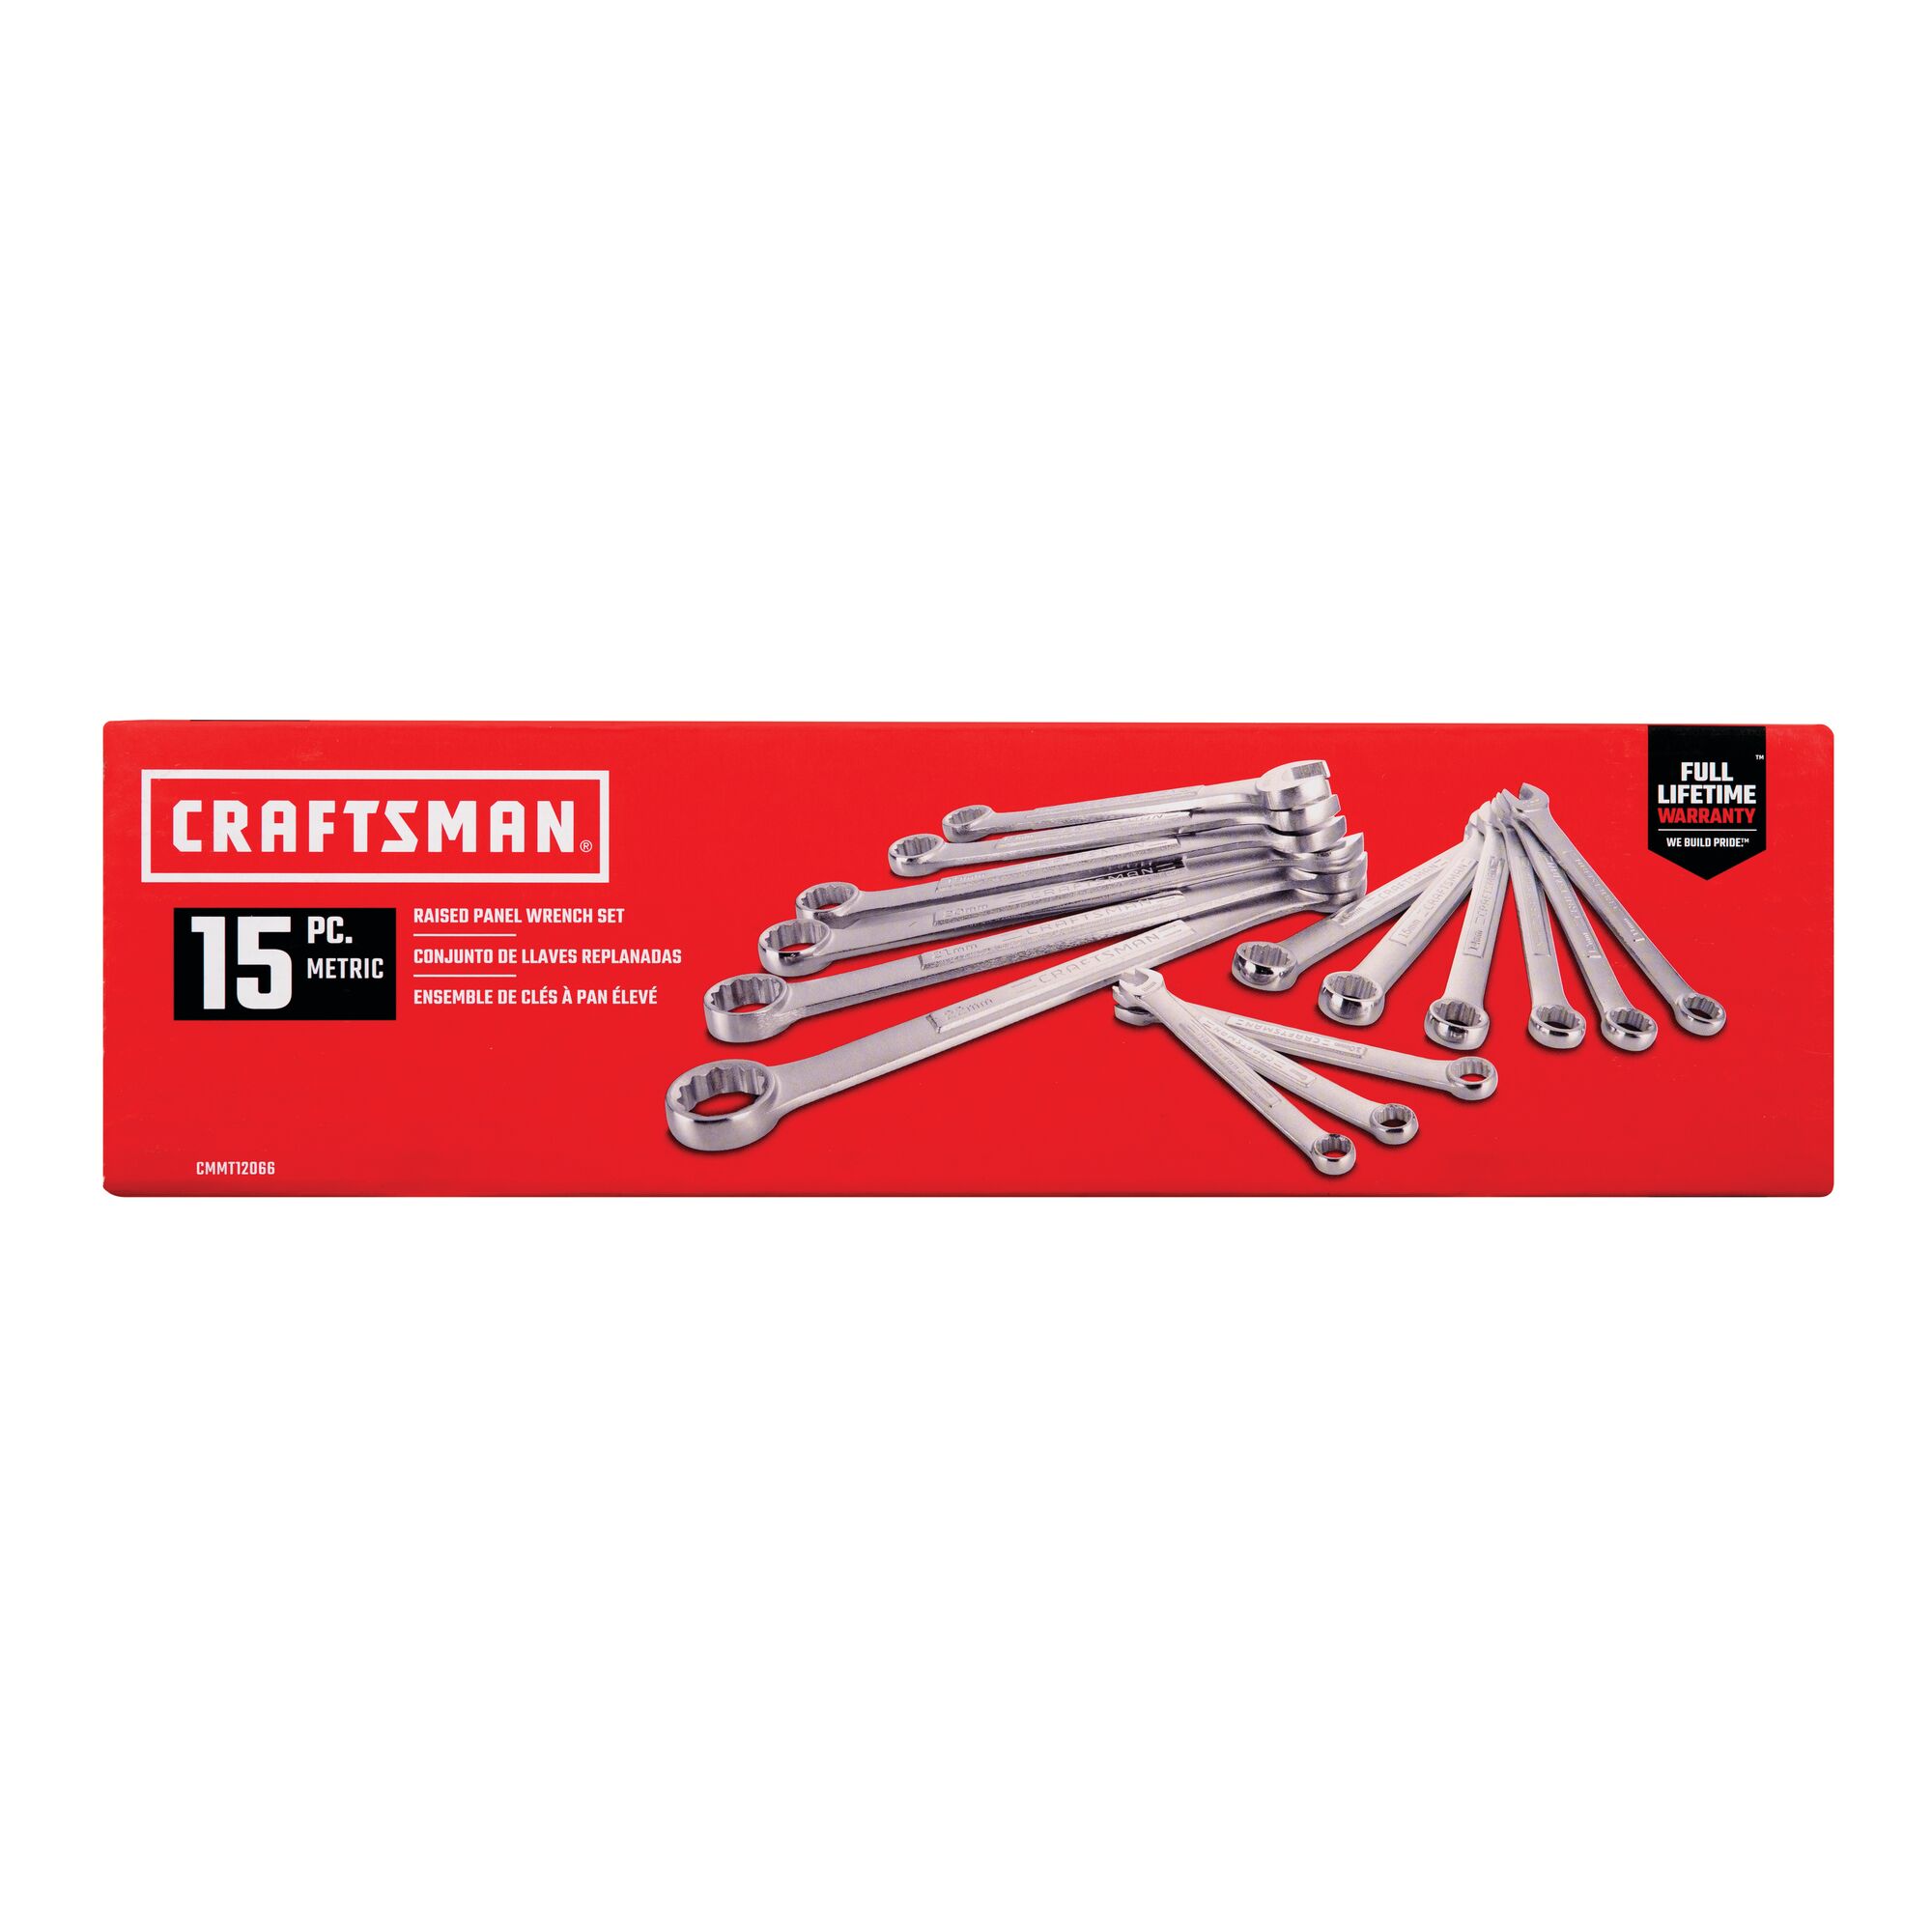 15 piece metric combination wrench set in cardboard box.